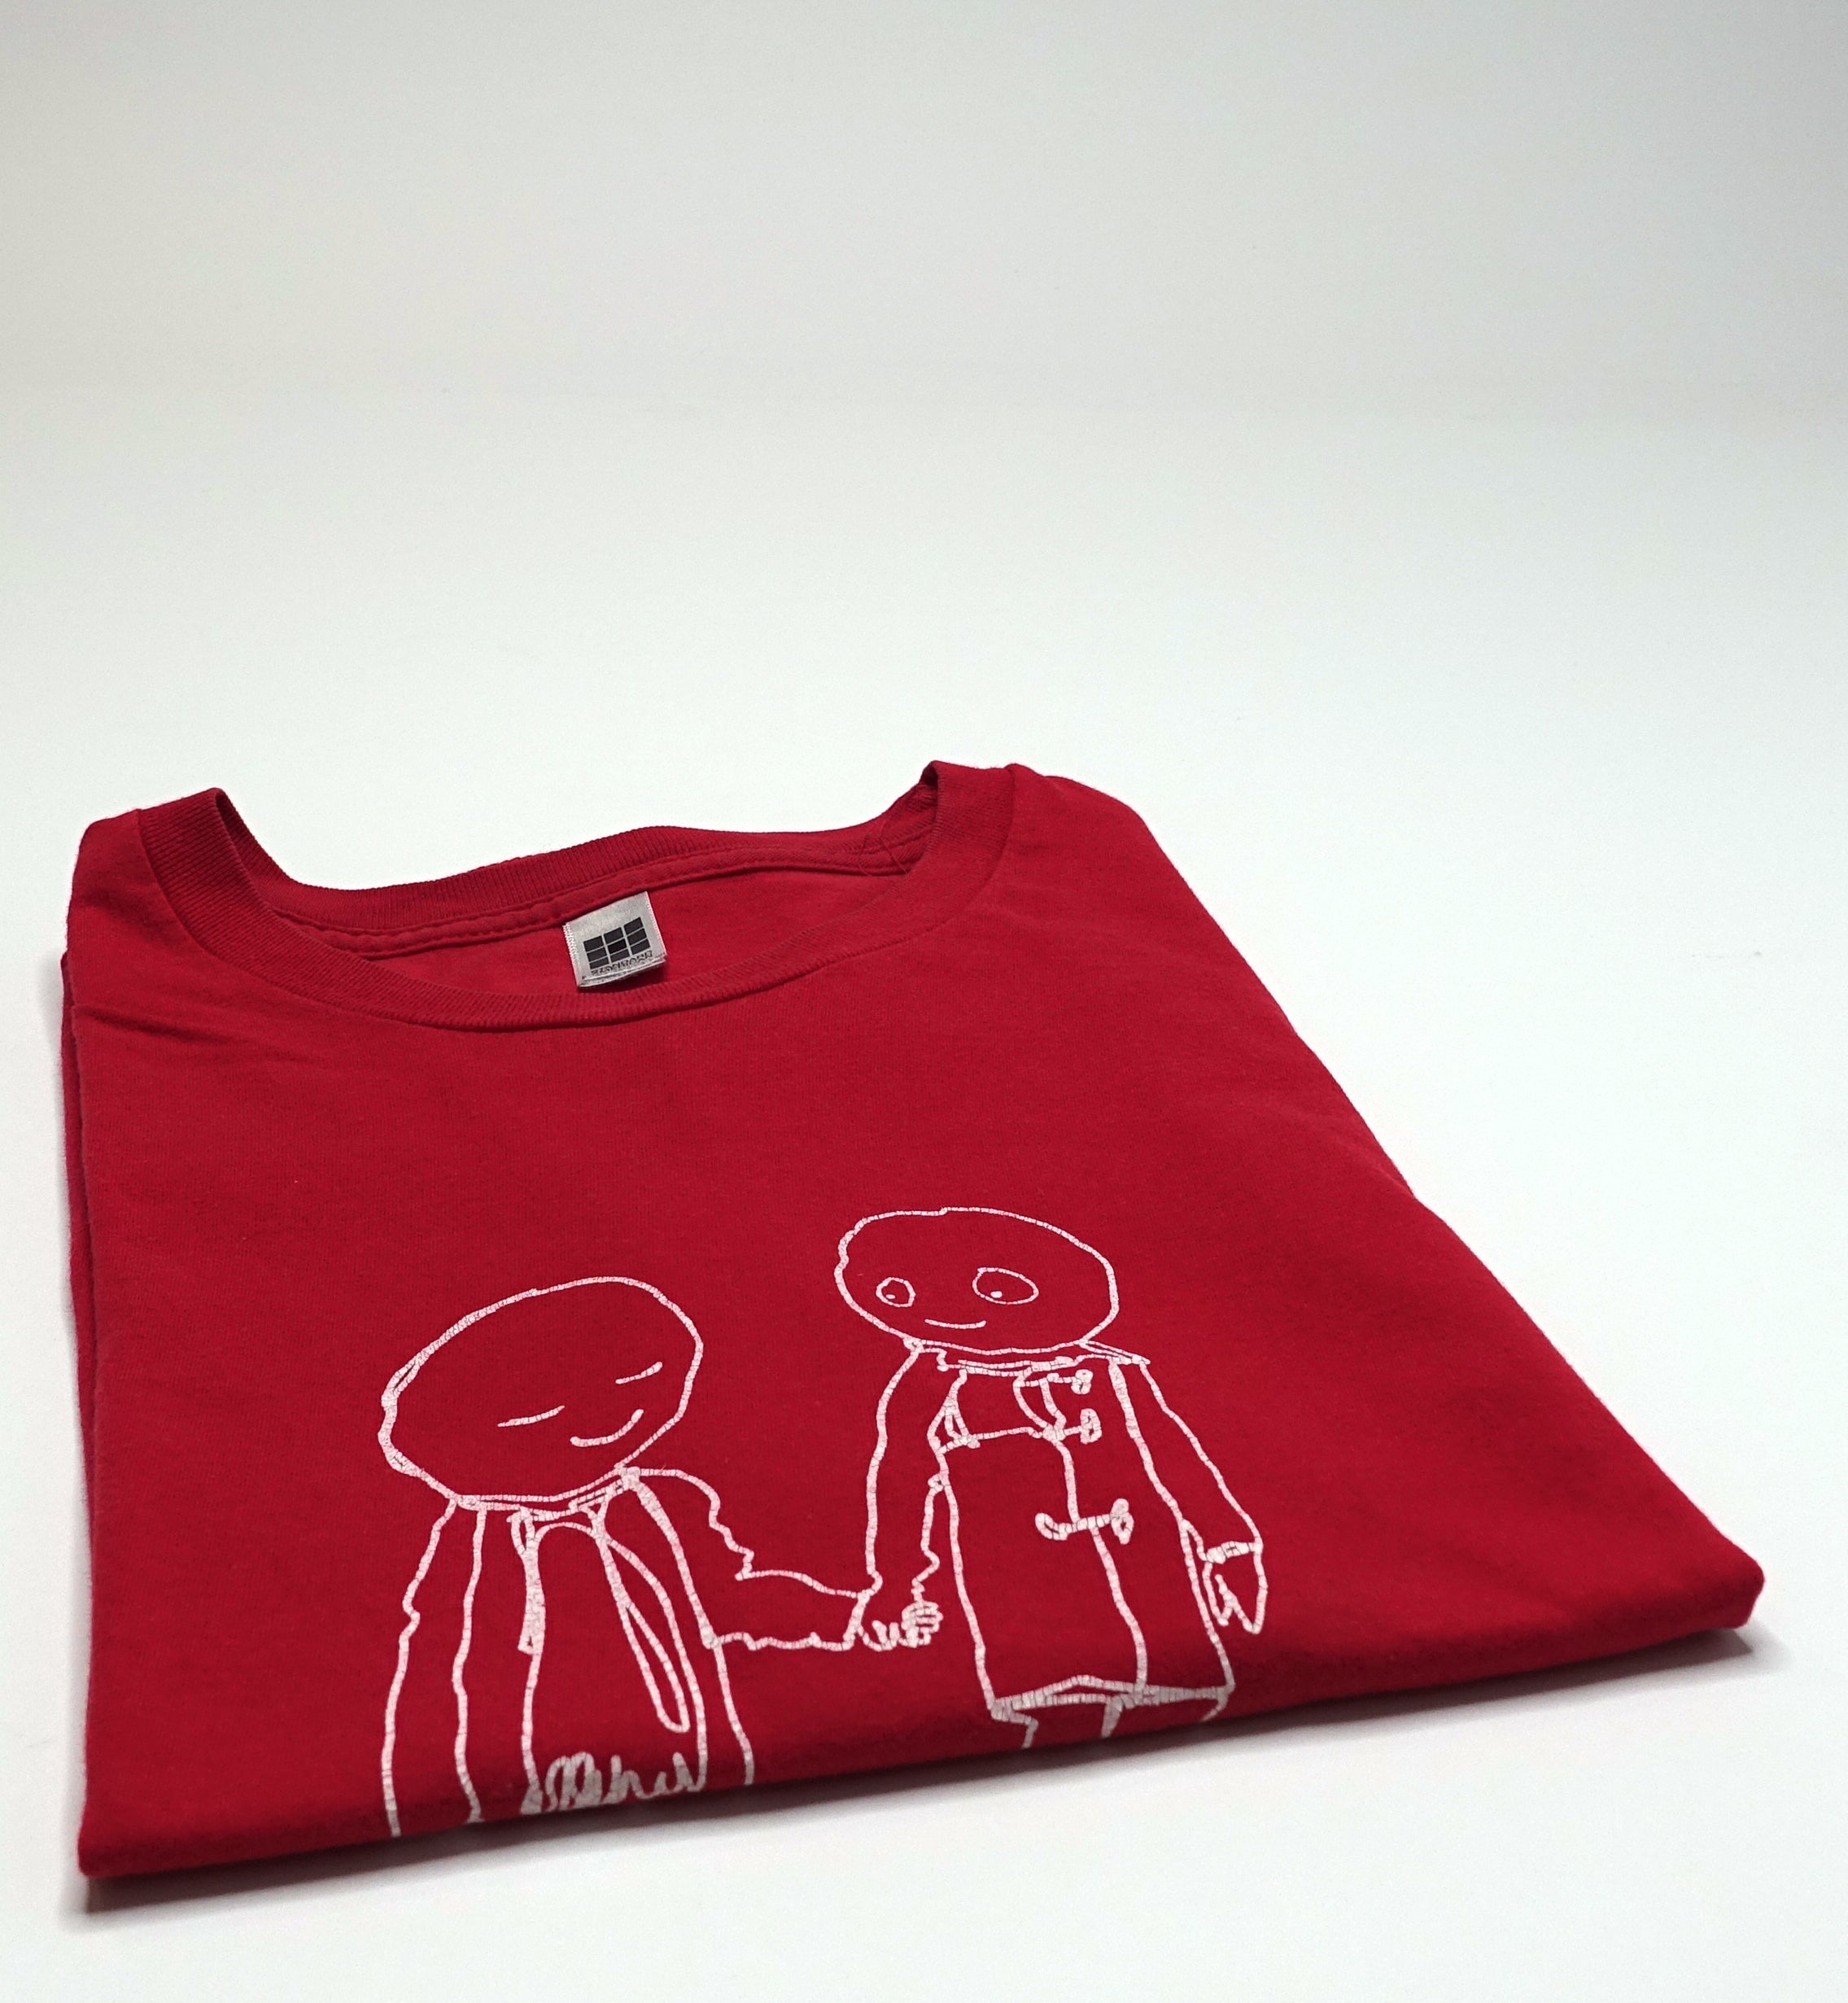 Manitoba / Caribou ‎– Friends Holding Hands 00's Tour Shirt Size Large